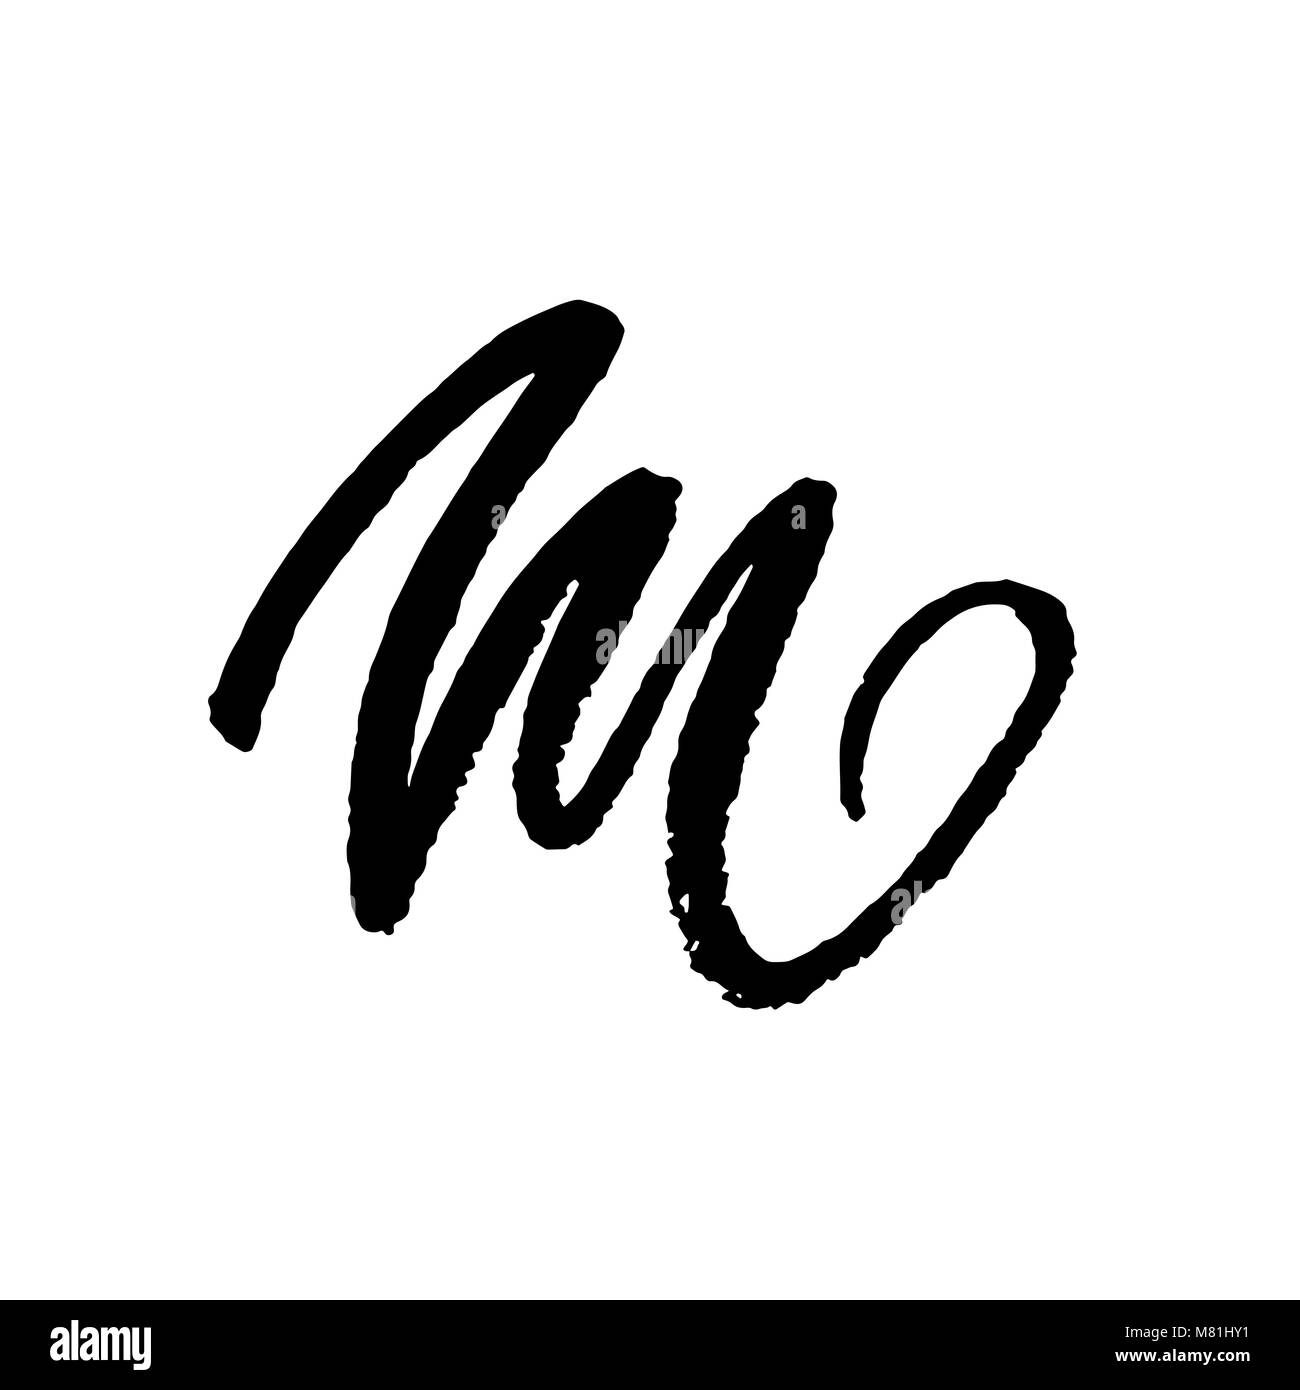 Letter M. Handwritten by dry brush. Rough strokes textured font